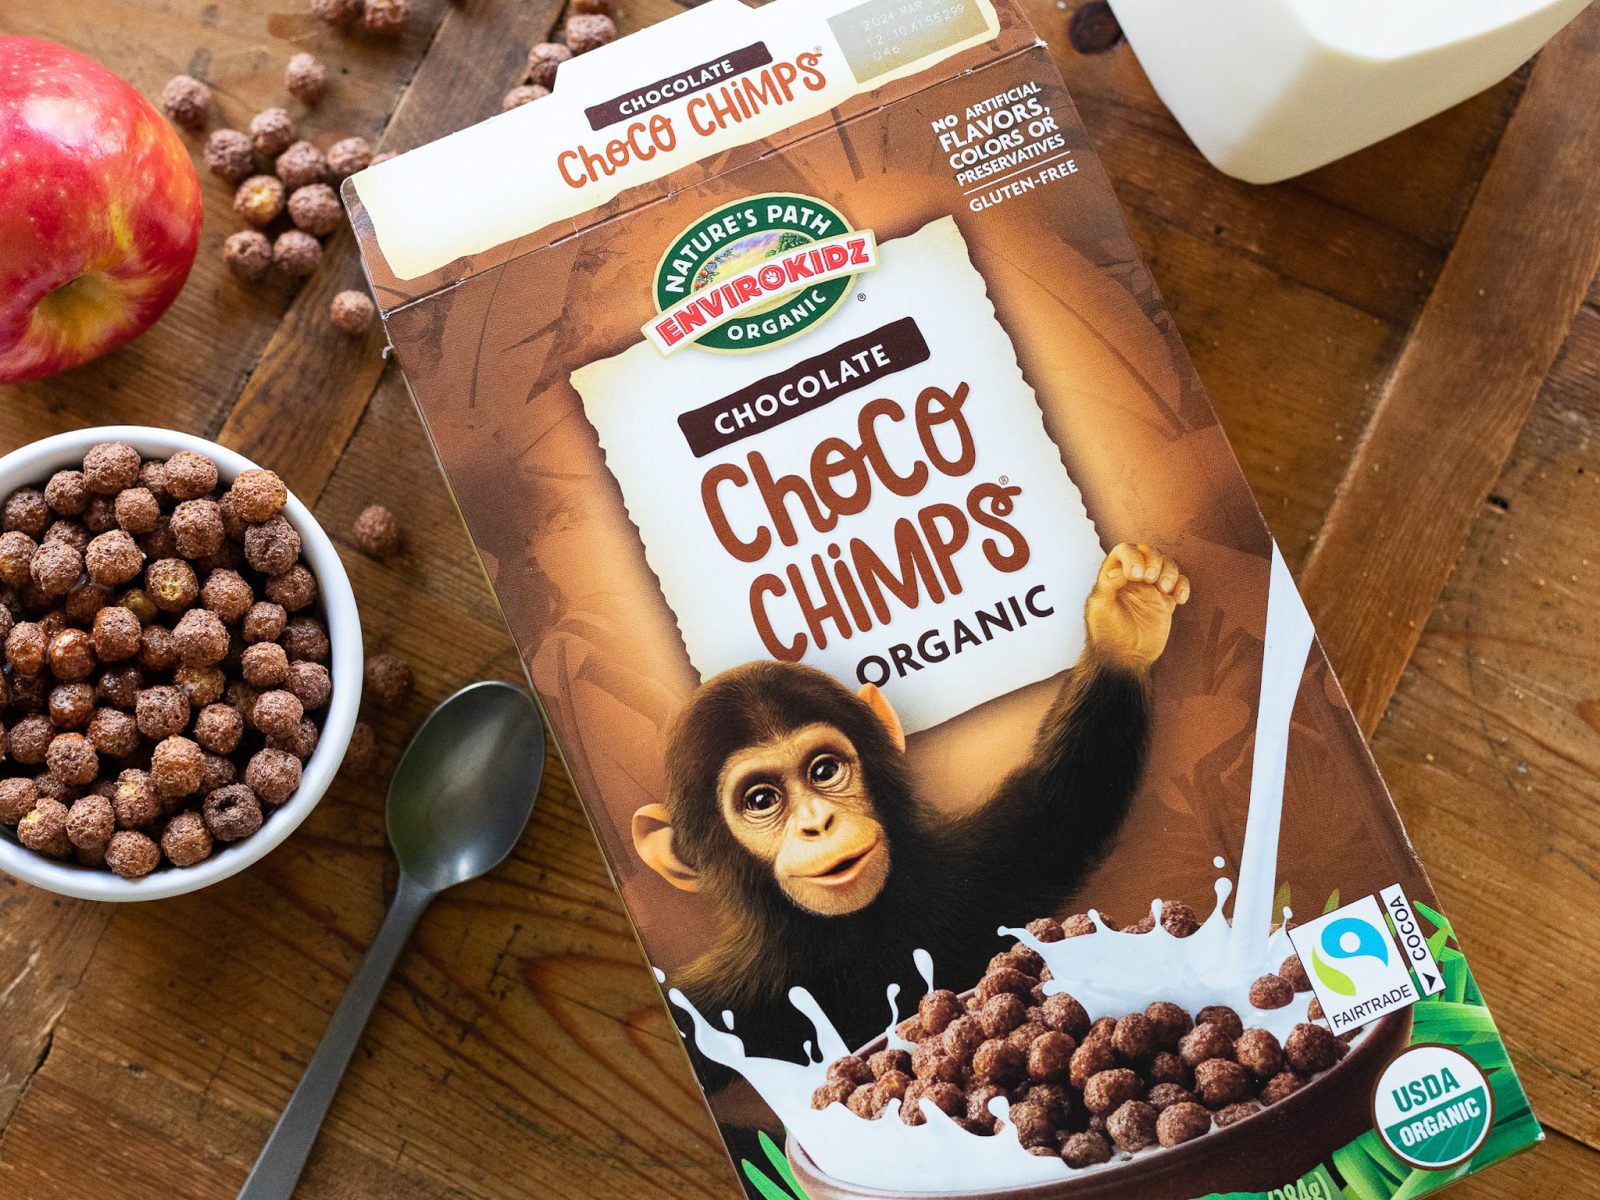 Nature’s Path Organic Choco Chimps Cereal Just $3.49 At Kroger